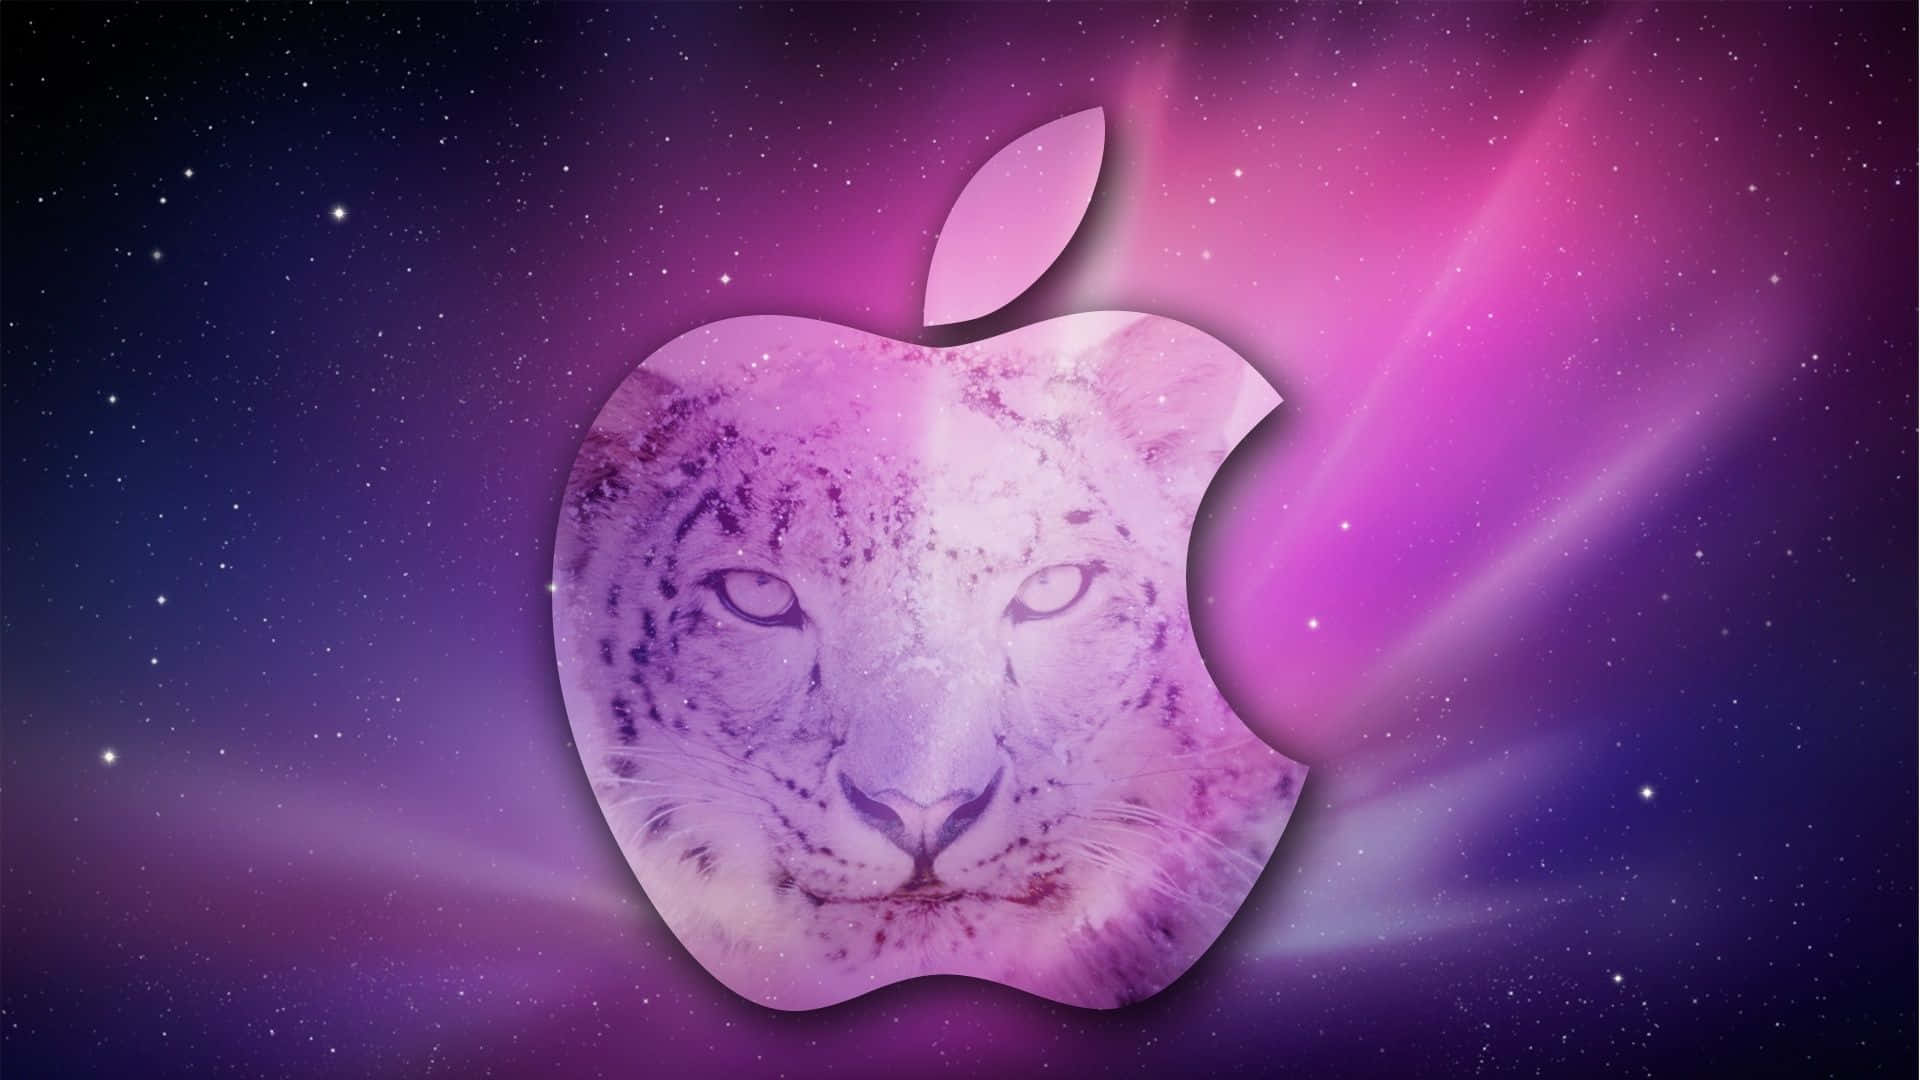 Cool Mac Logo With A White Tiger Wallpaper